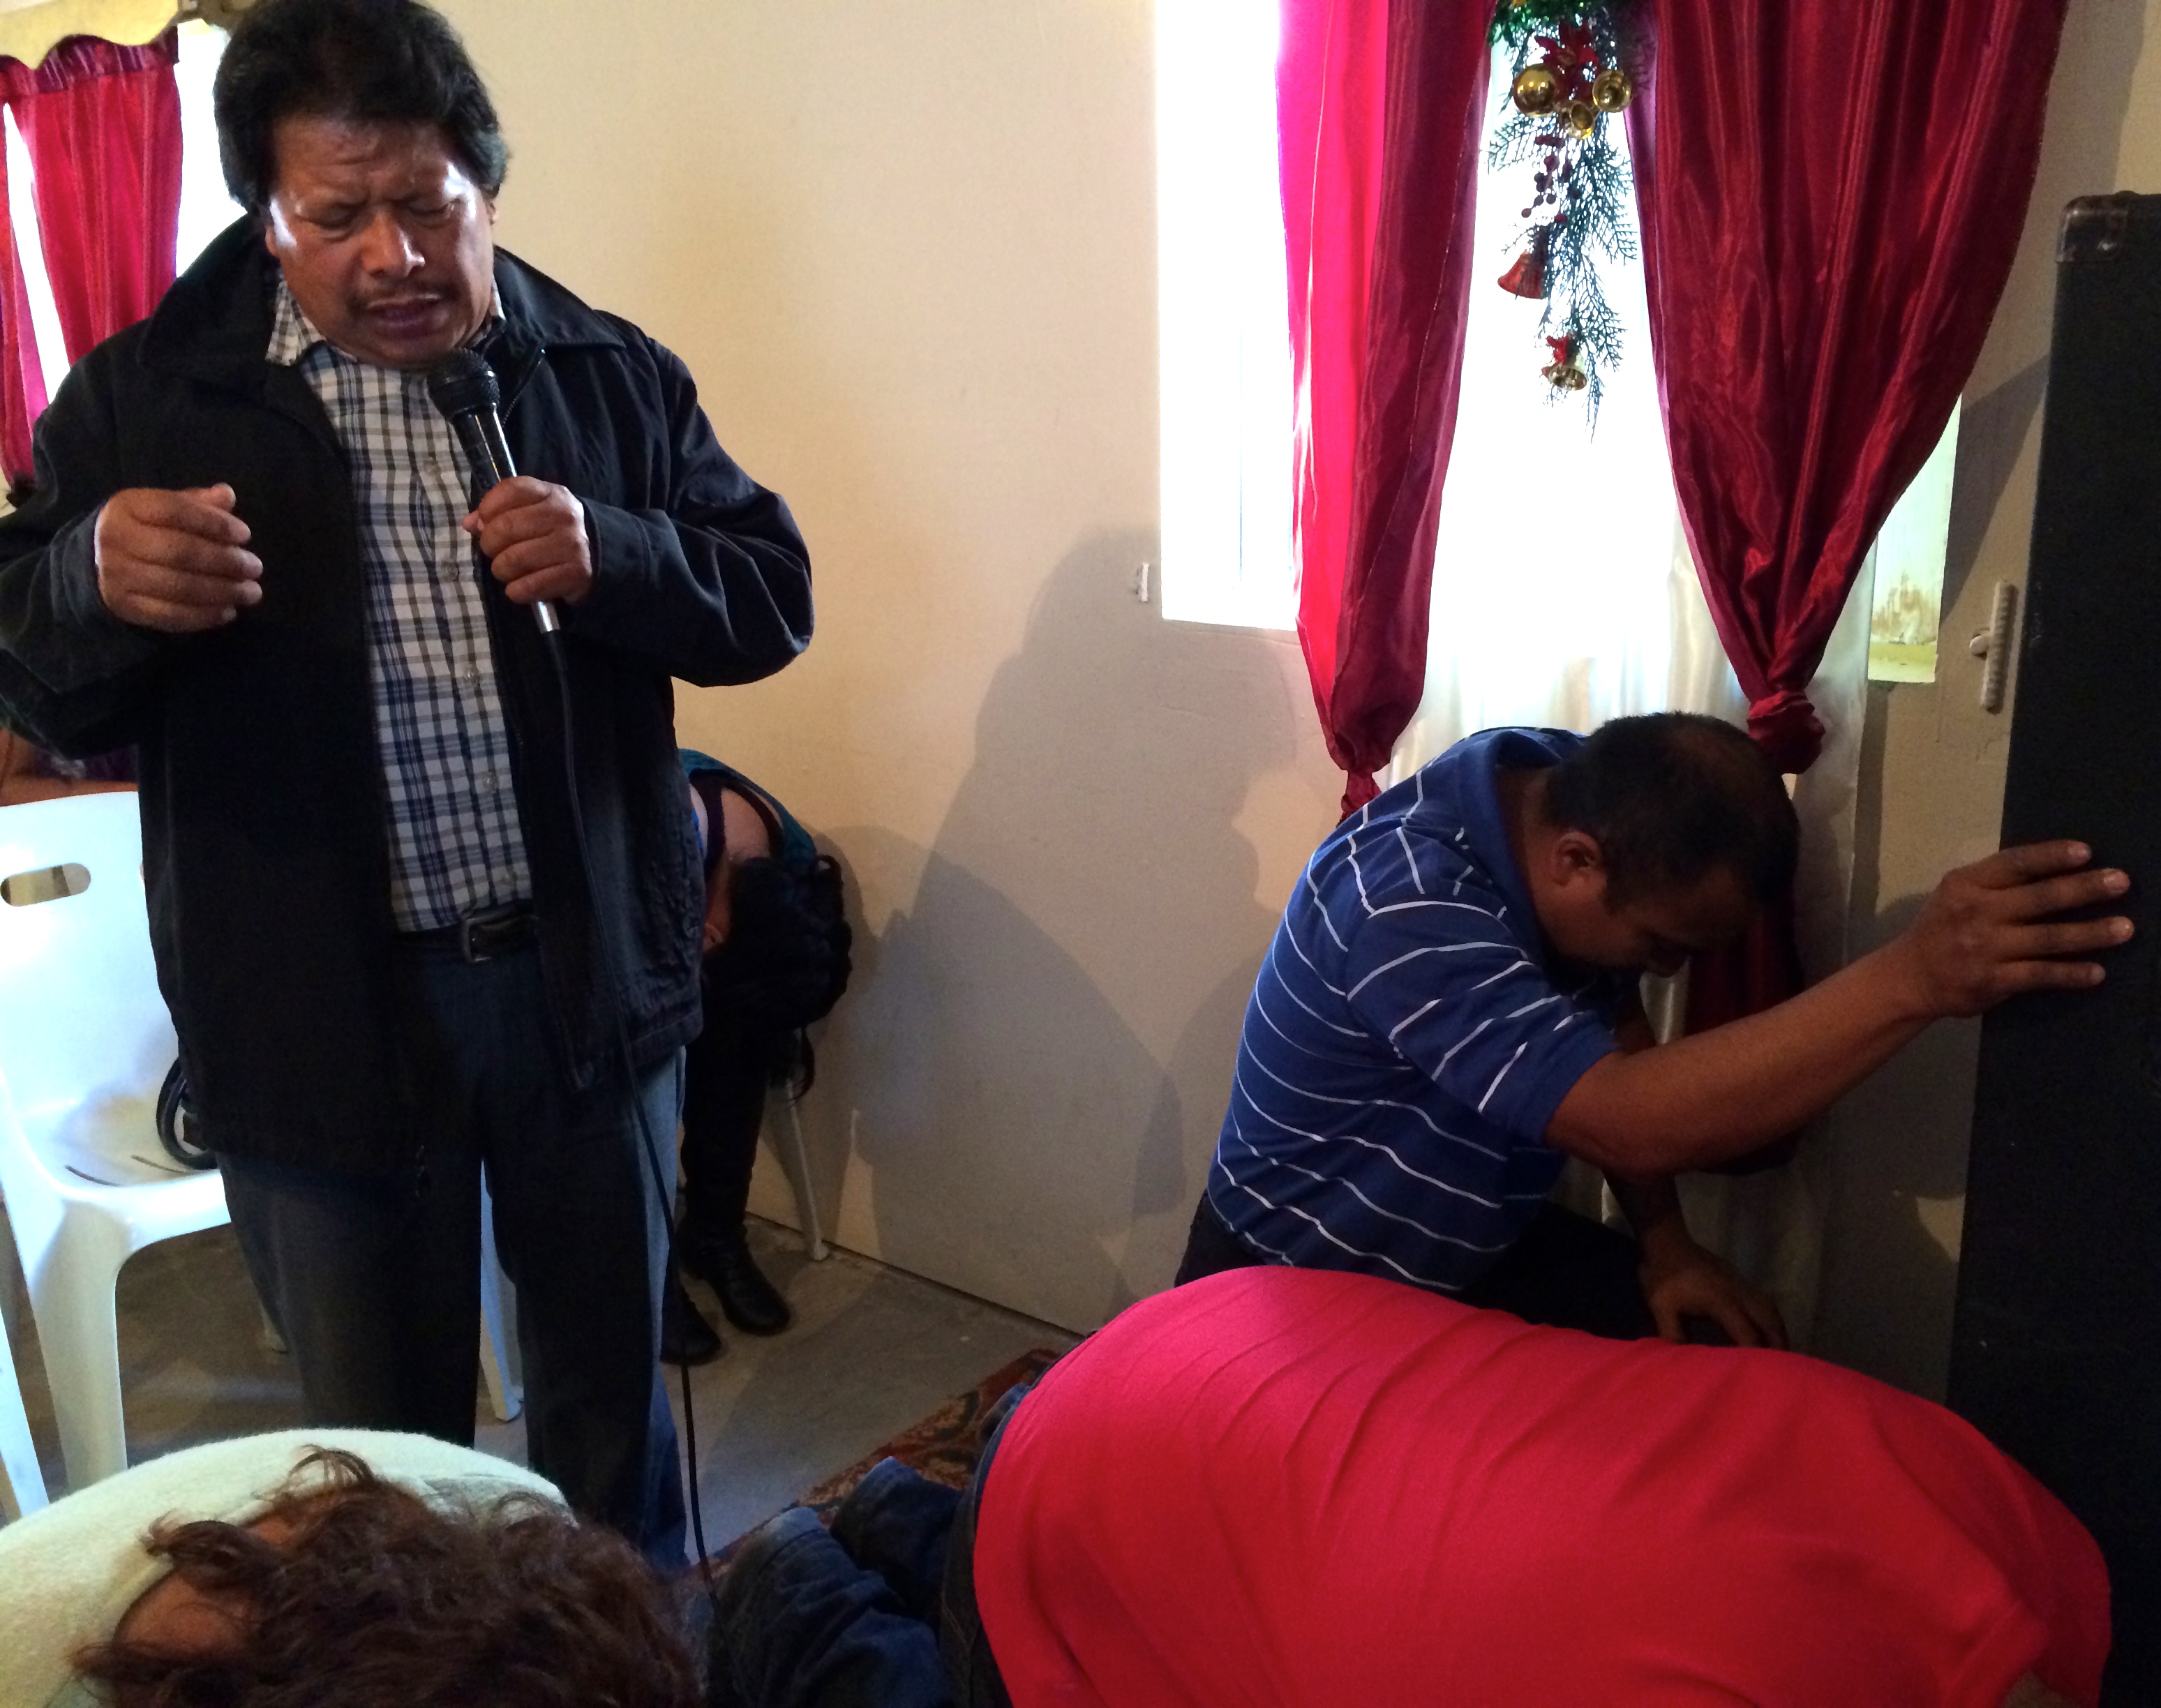 Pastor Eleodoro Rosas praying for those that came up for prayer after the sermon